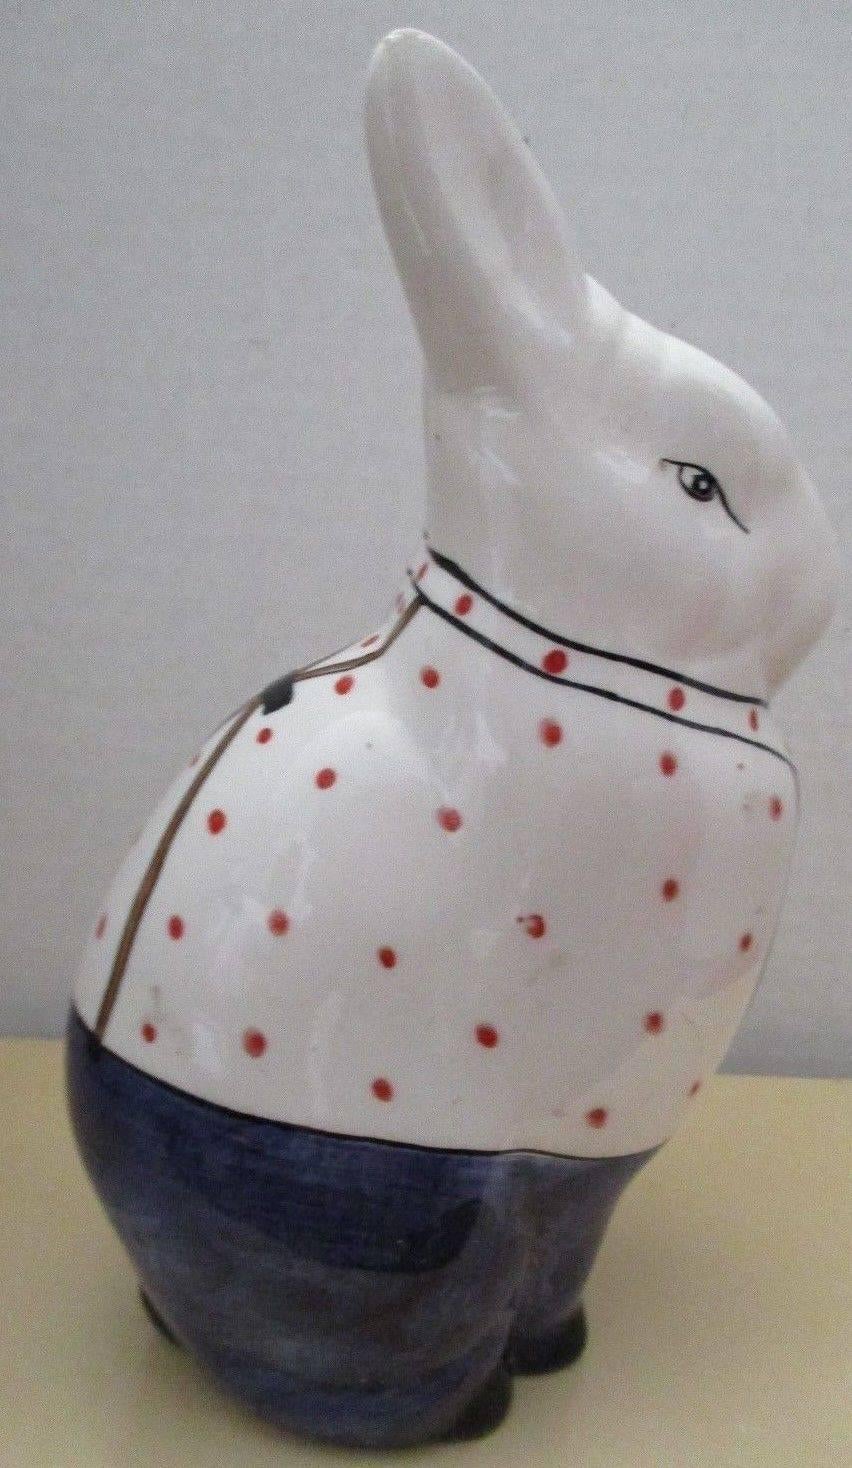 Here's a beautiful and unique way to accent your indoor or outdoor space with this very unusual treasure from Italy! 

This is a superb hand-painted and hand glazed Mid-Century Modern ceramic effigy of a rabbit with a beautiful red and blue coat